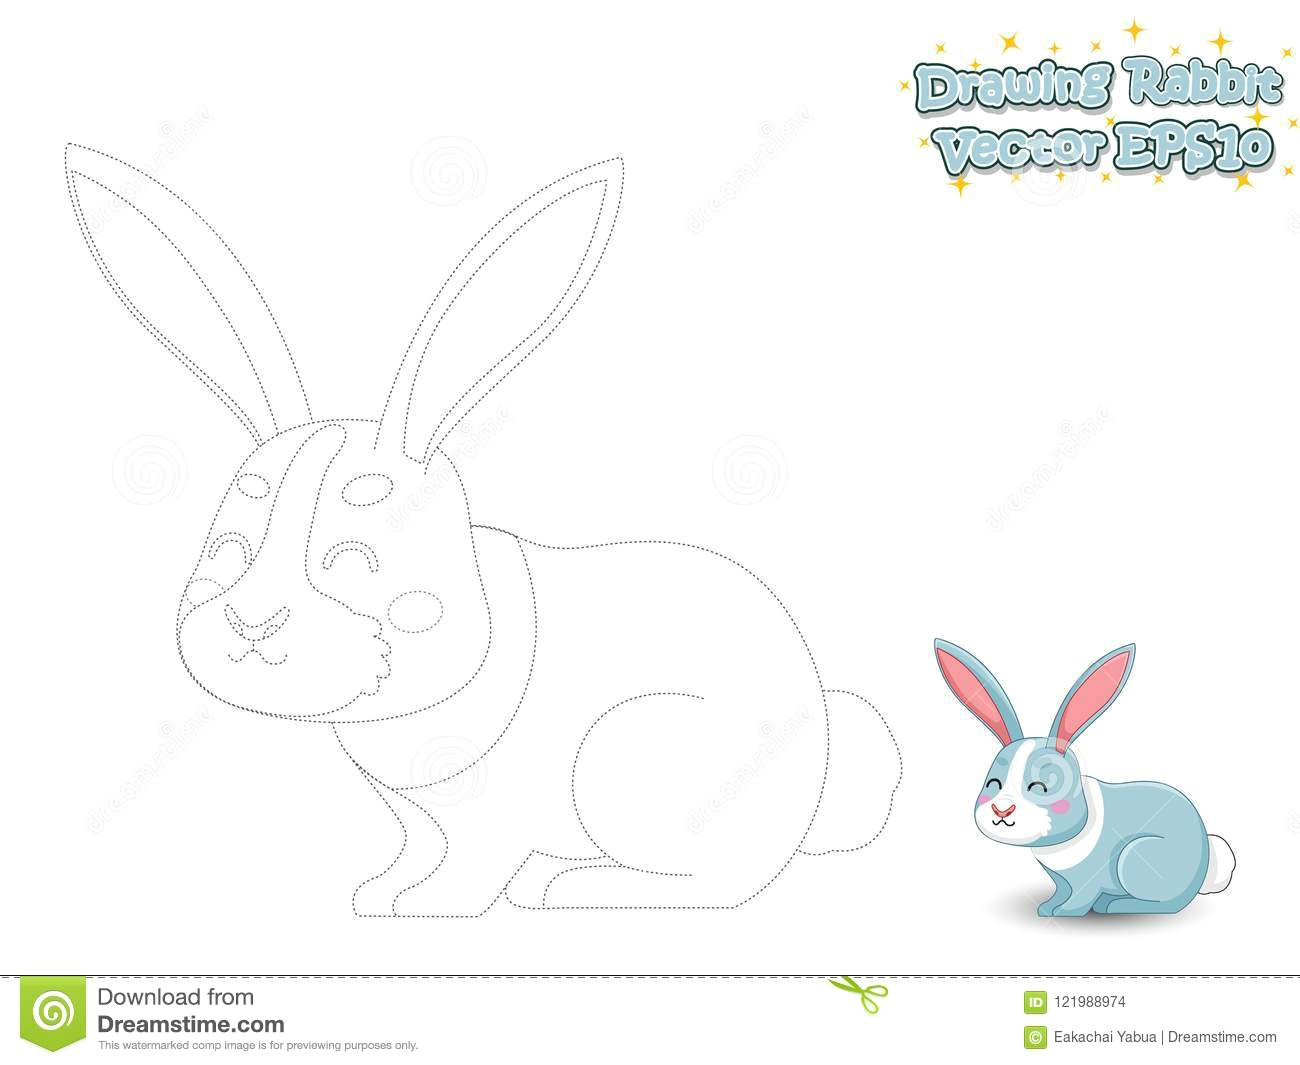 Drawing A Cartoon Rabbit Drawing and Paint Cute Cartoon Rabbit Educational Game for Kids